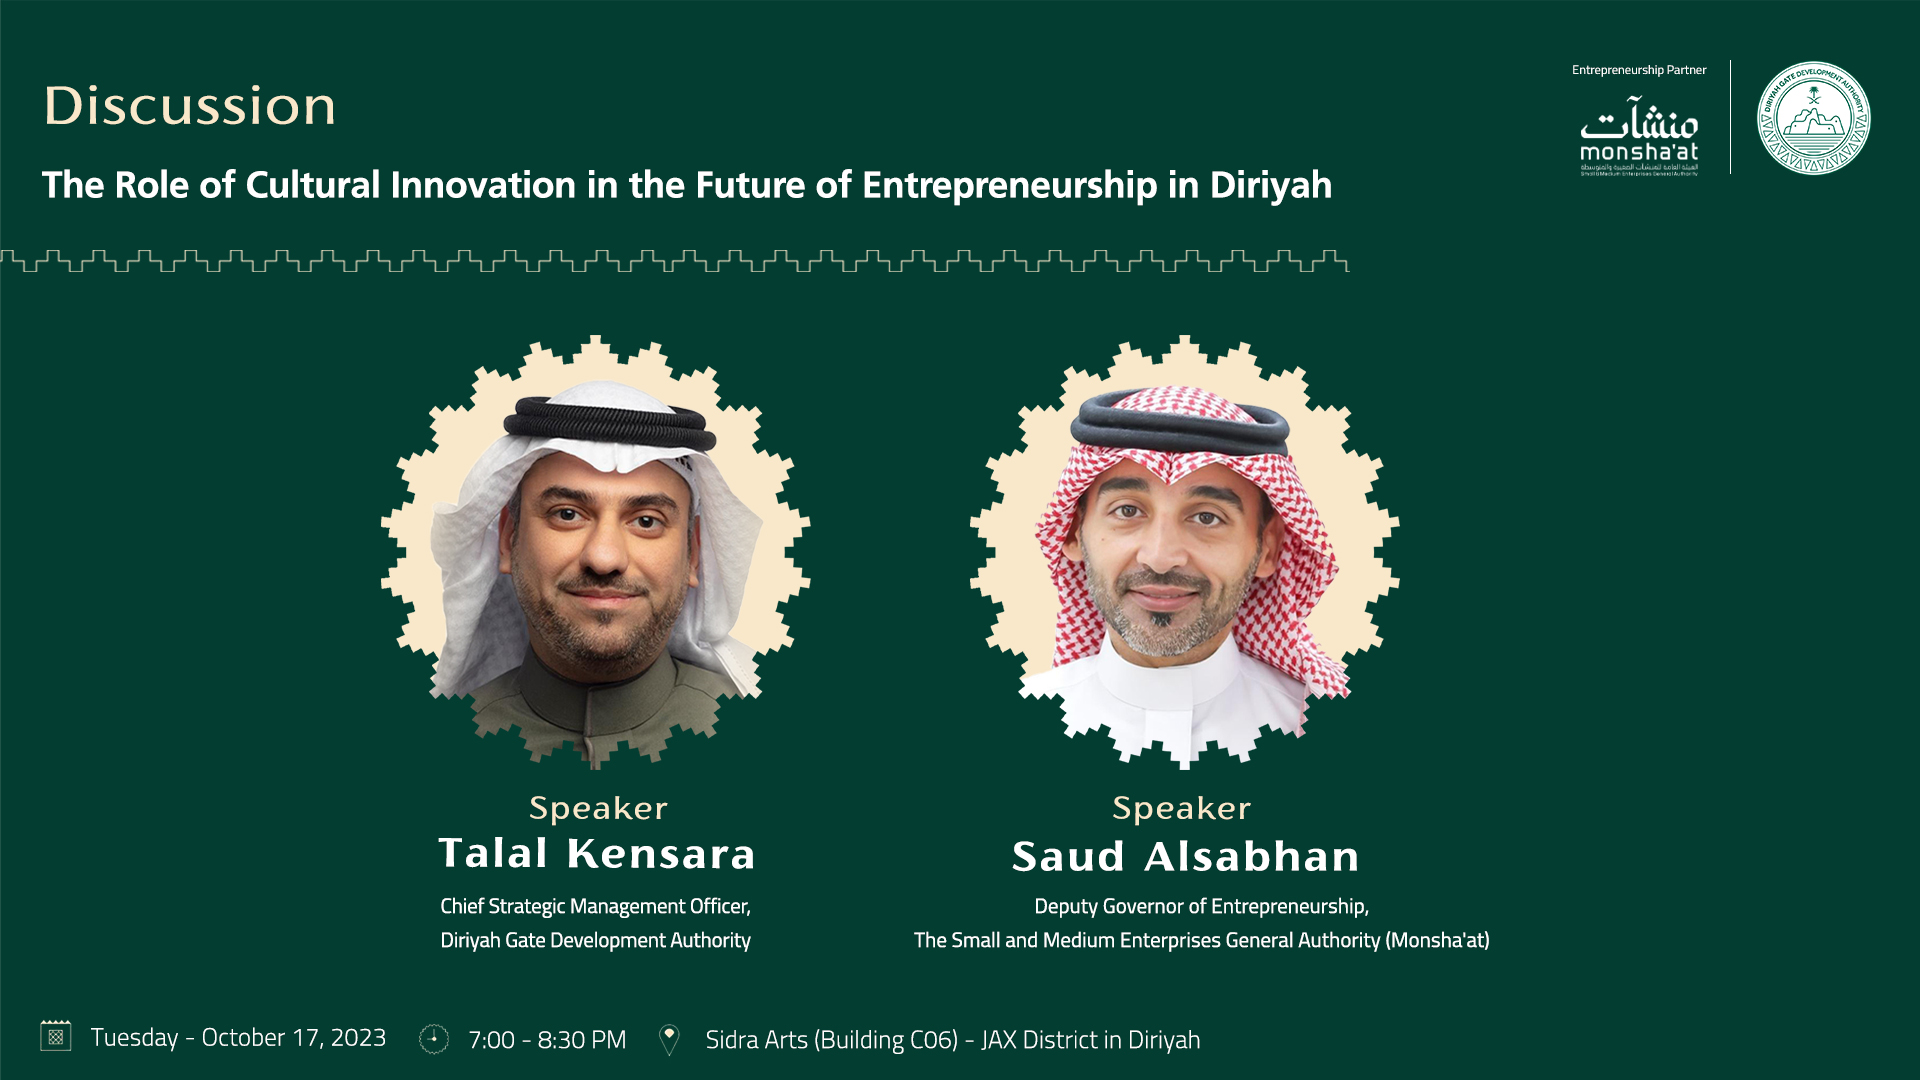 The Role of Cultural Innovation in the Future of Entrepreneurship in Diriyah